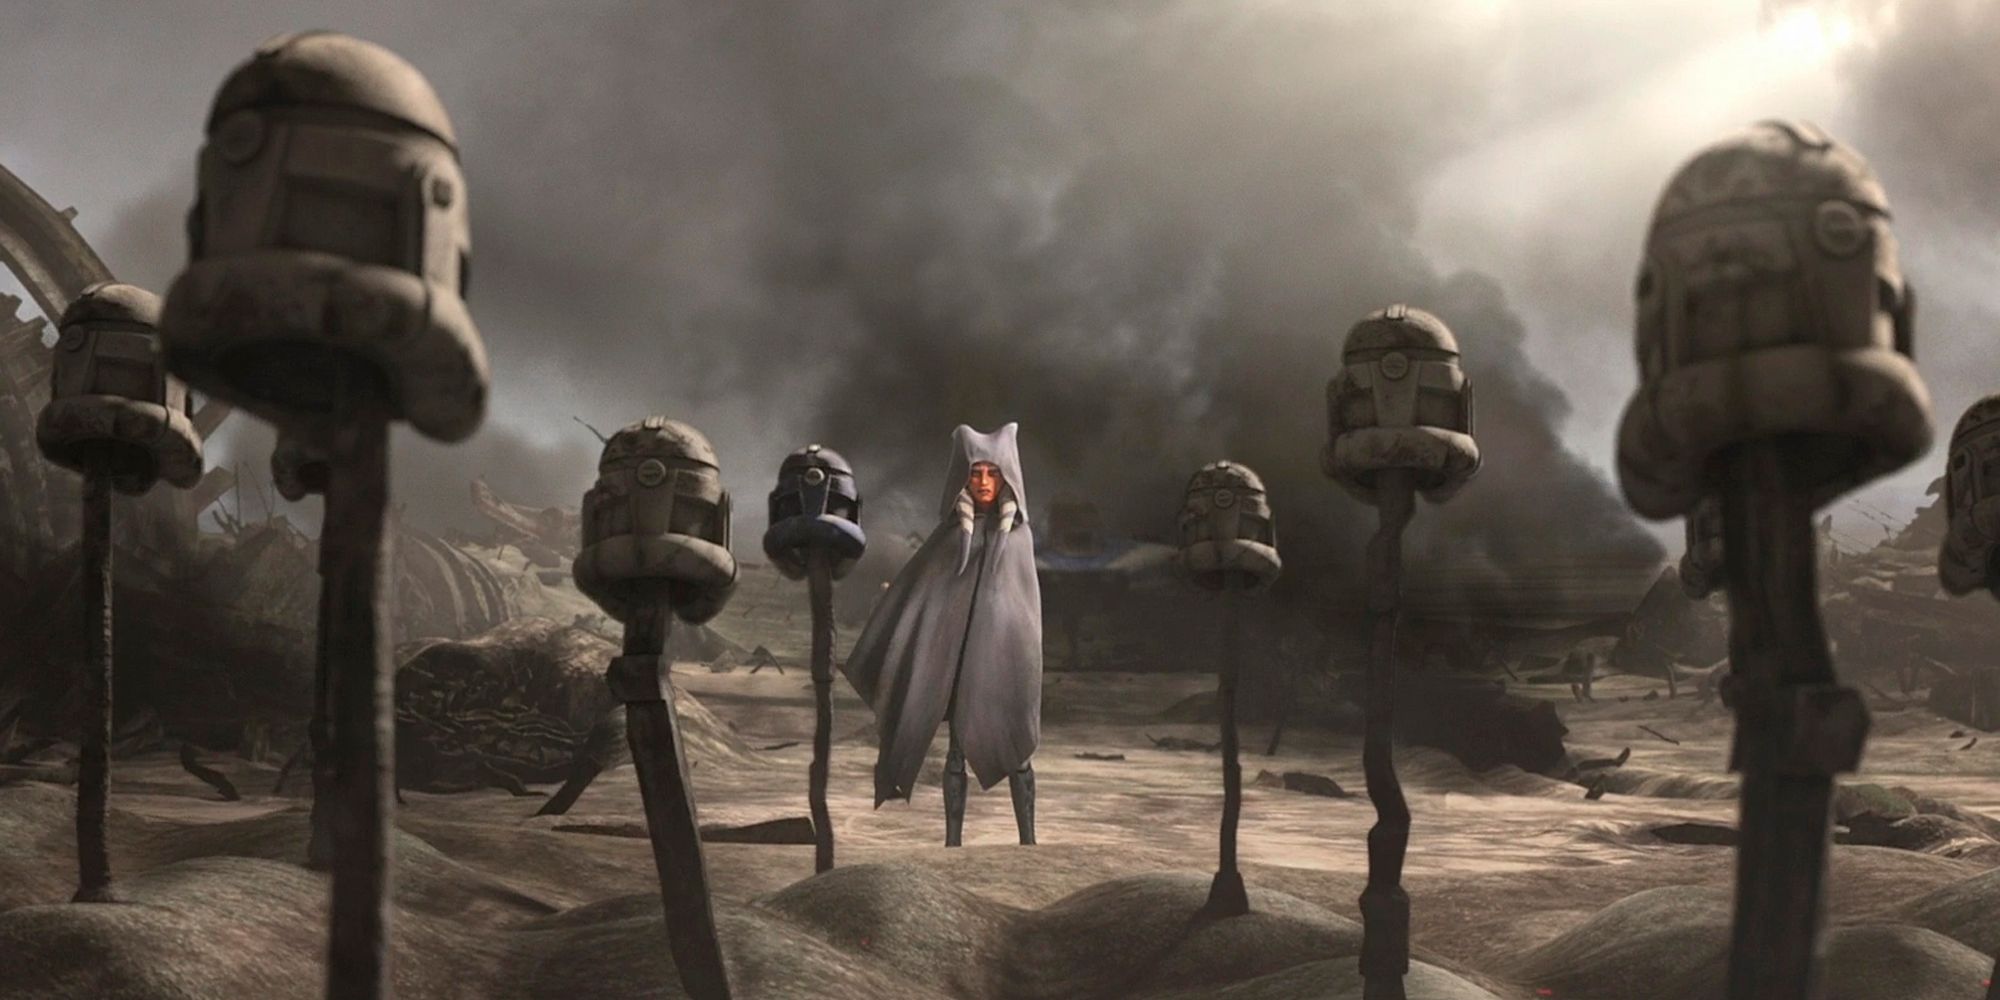 Ahsoka Tano buired the clones who tried to kill her after Order 66 in Star Wars The Clone Wars